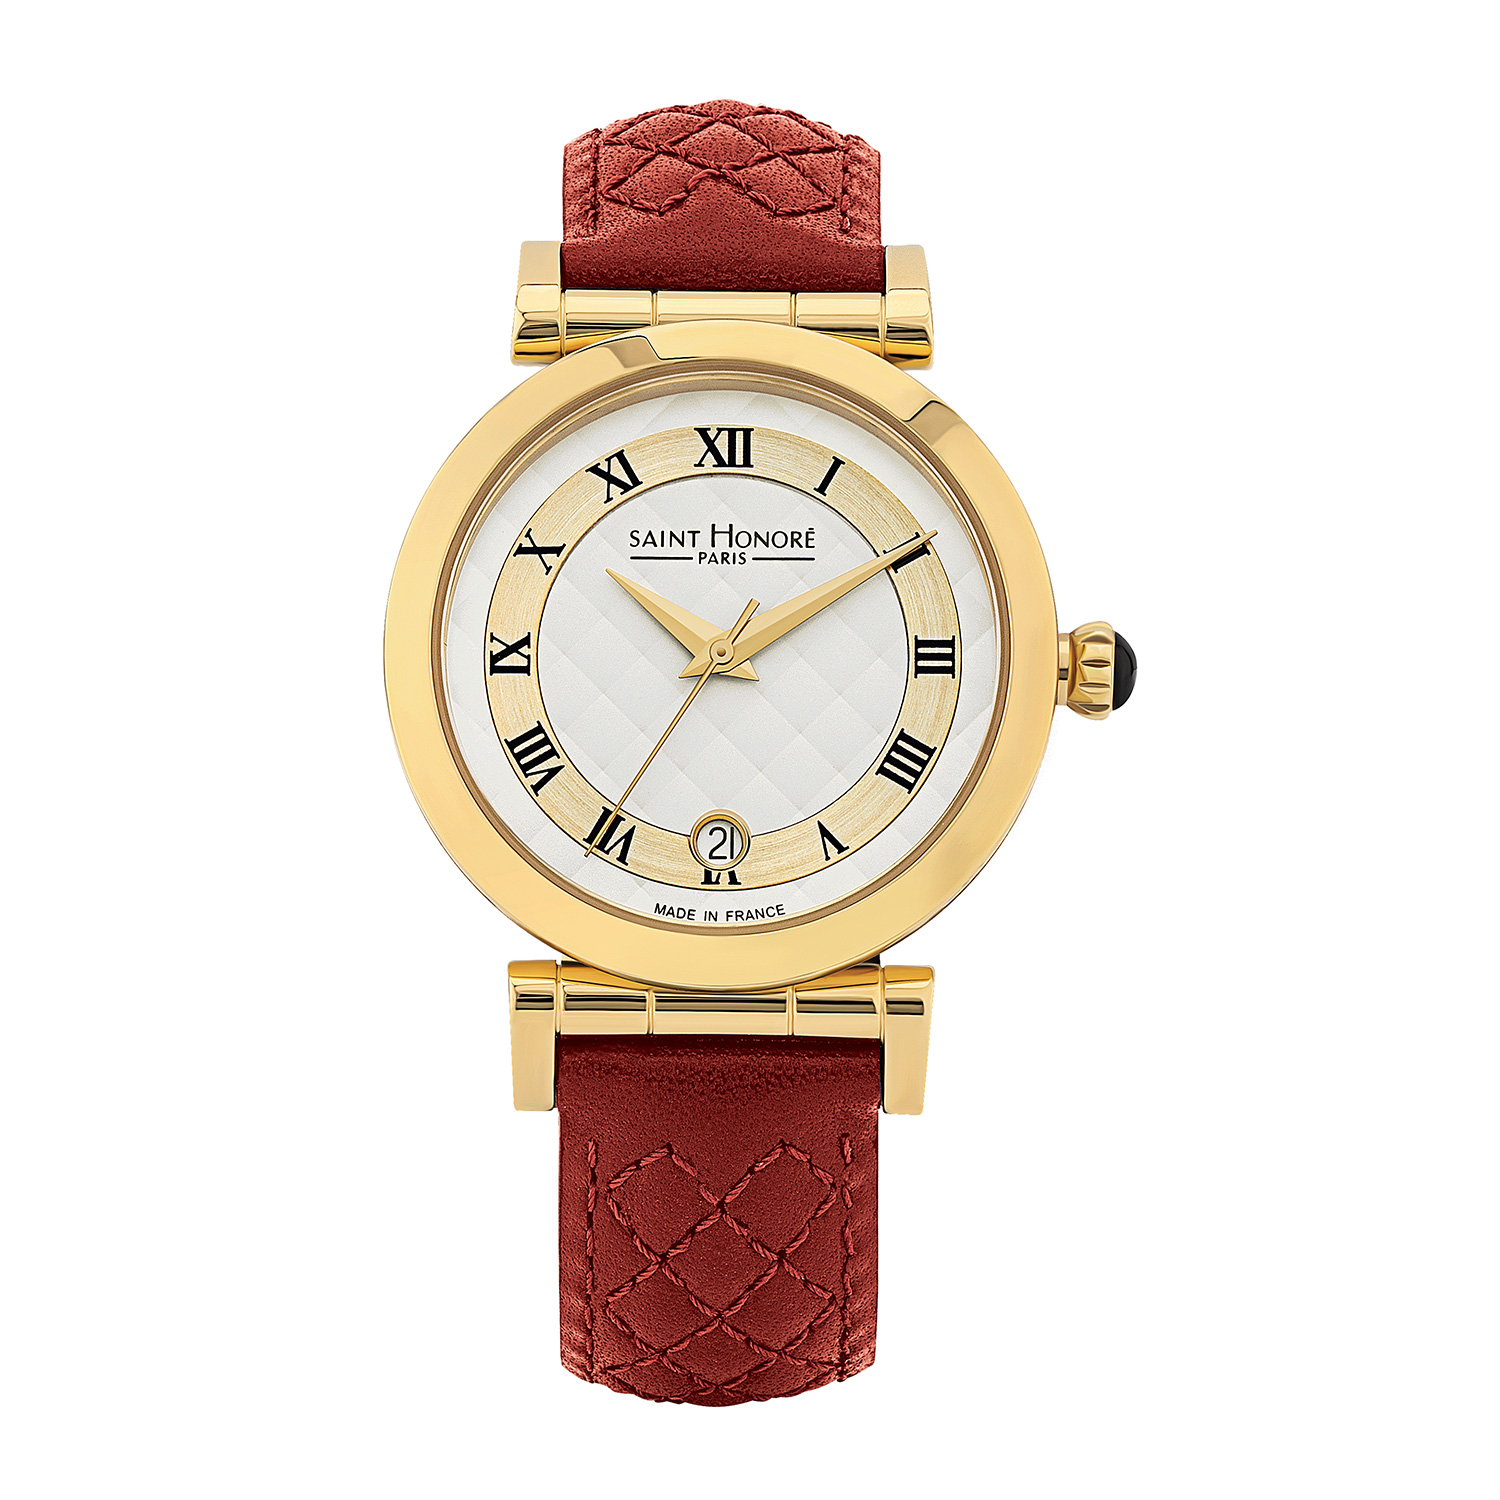 OPERA Women's watch - ion plating gold case, white dial, green leather strap